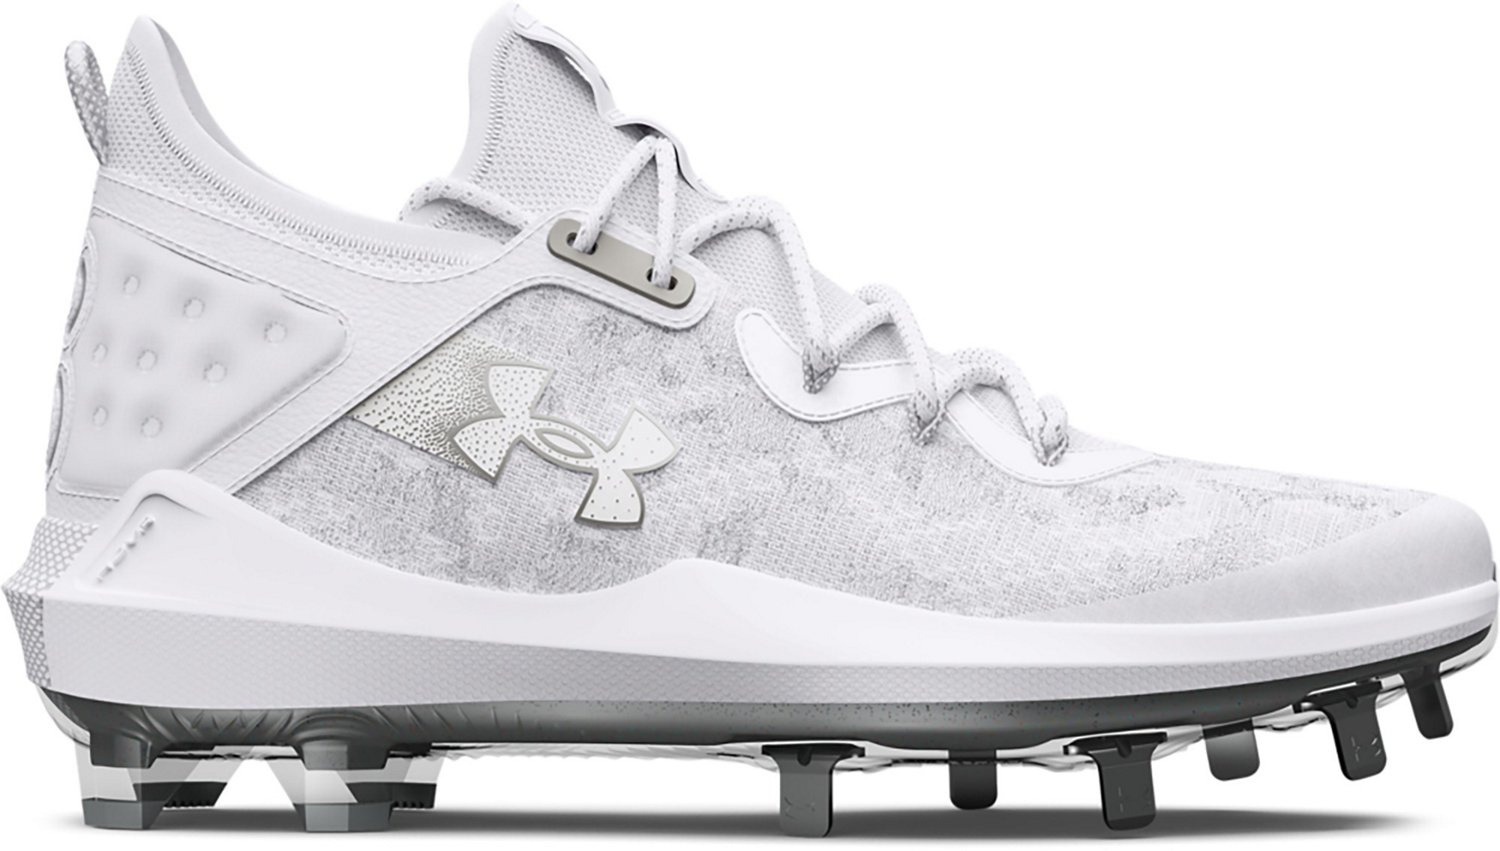 Under Armour Mens Harper 8 Low ST Baseball Cleats